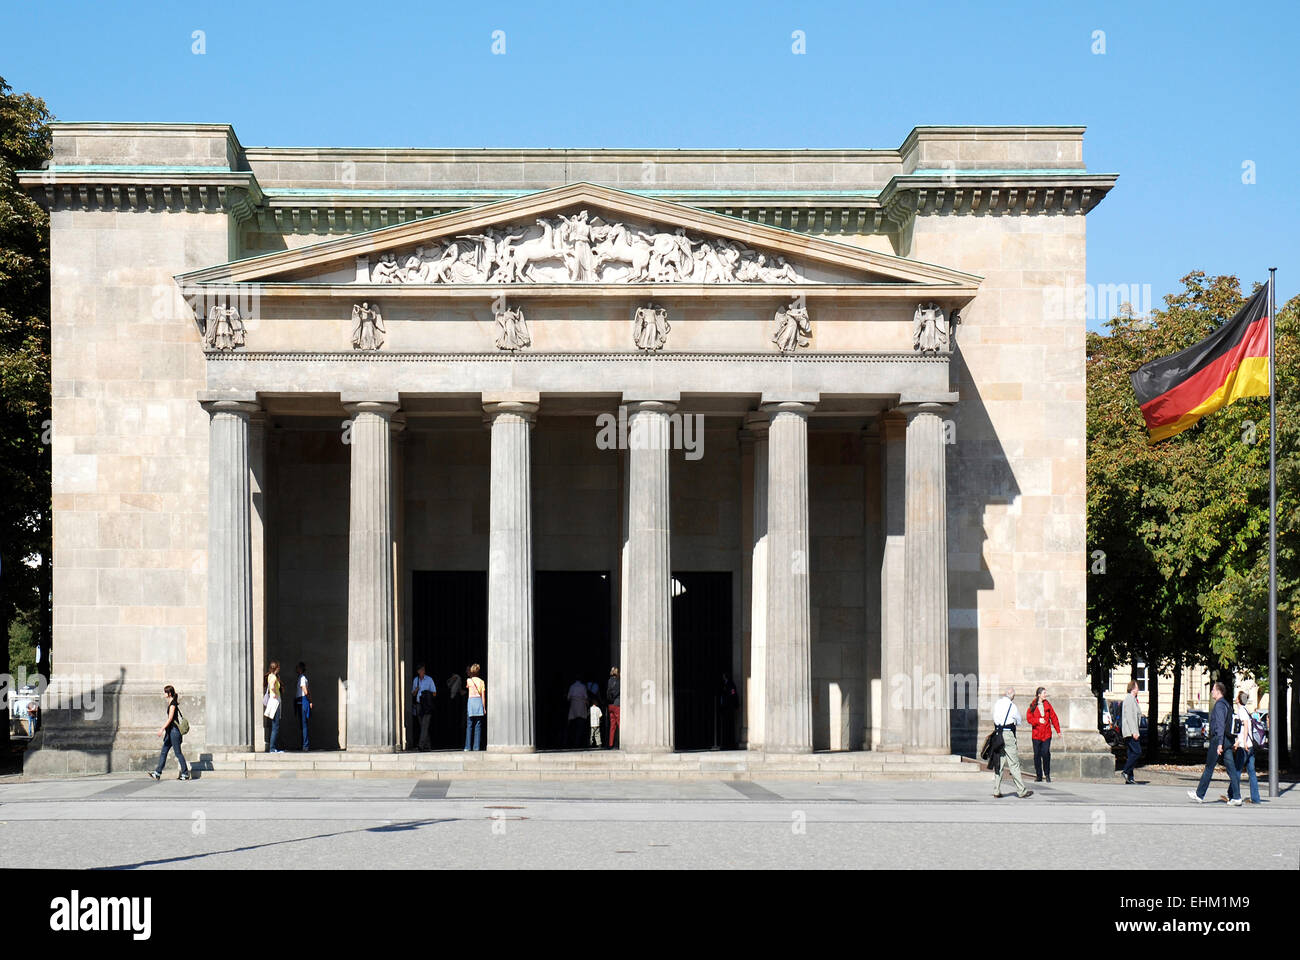 New Guardhouse in Berlin - Central Memorial of the Federal Republic of Germany for the Victims of War and Dictatorship. Stock Photo